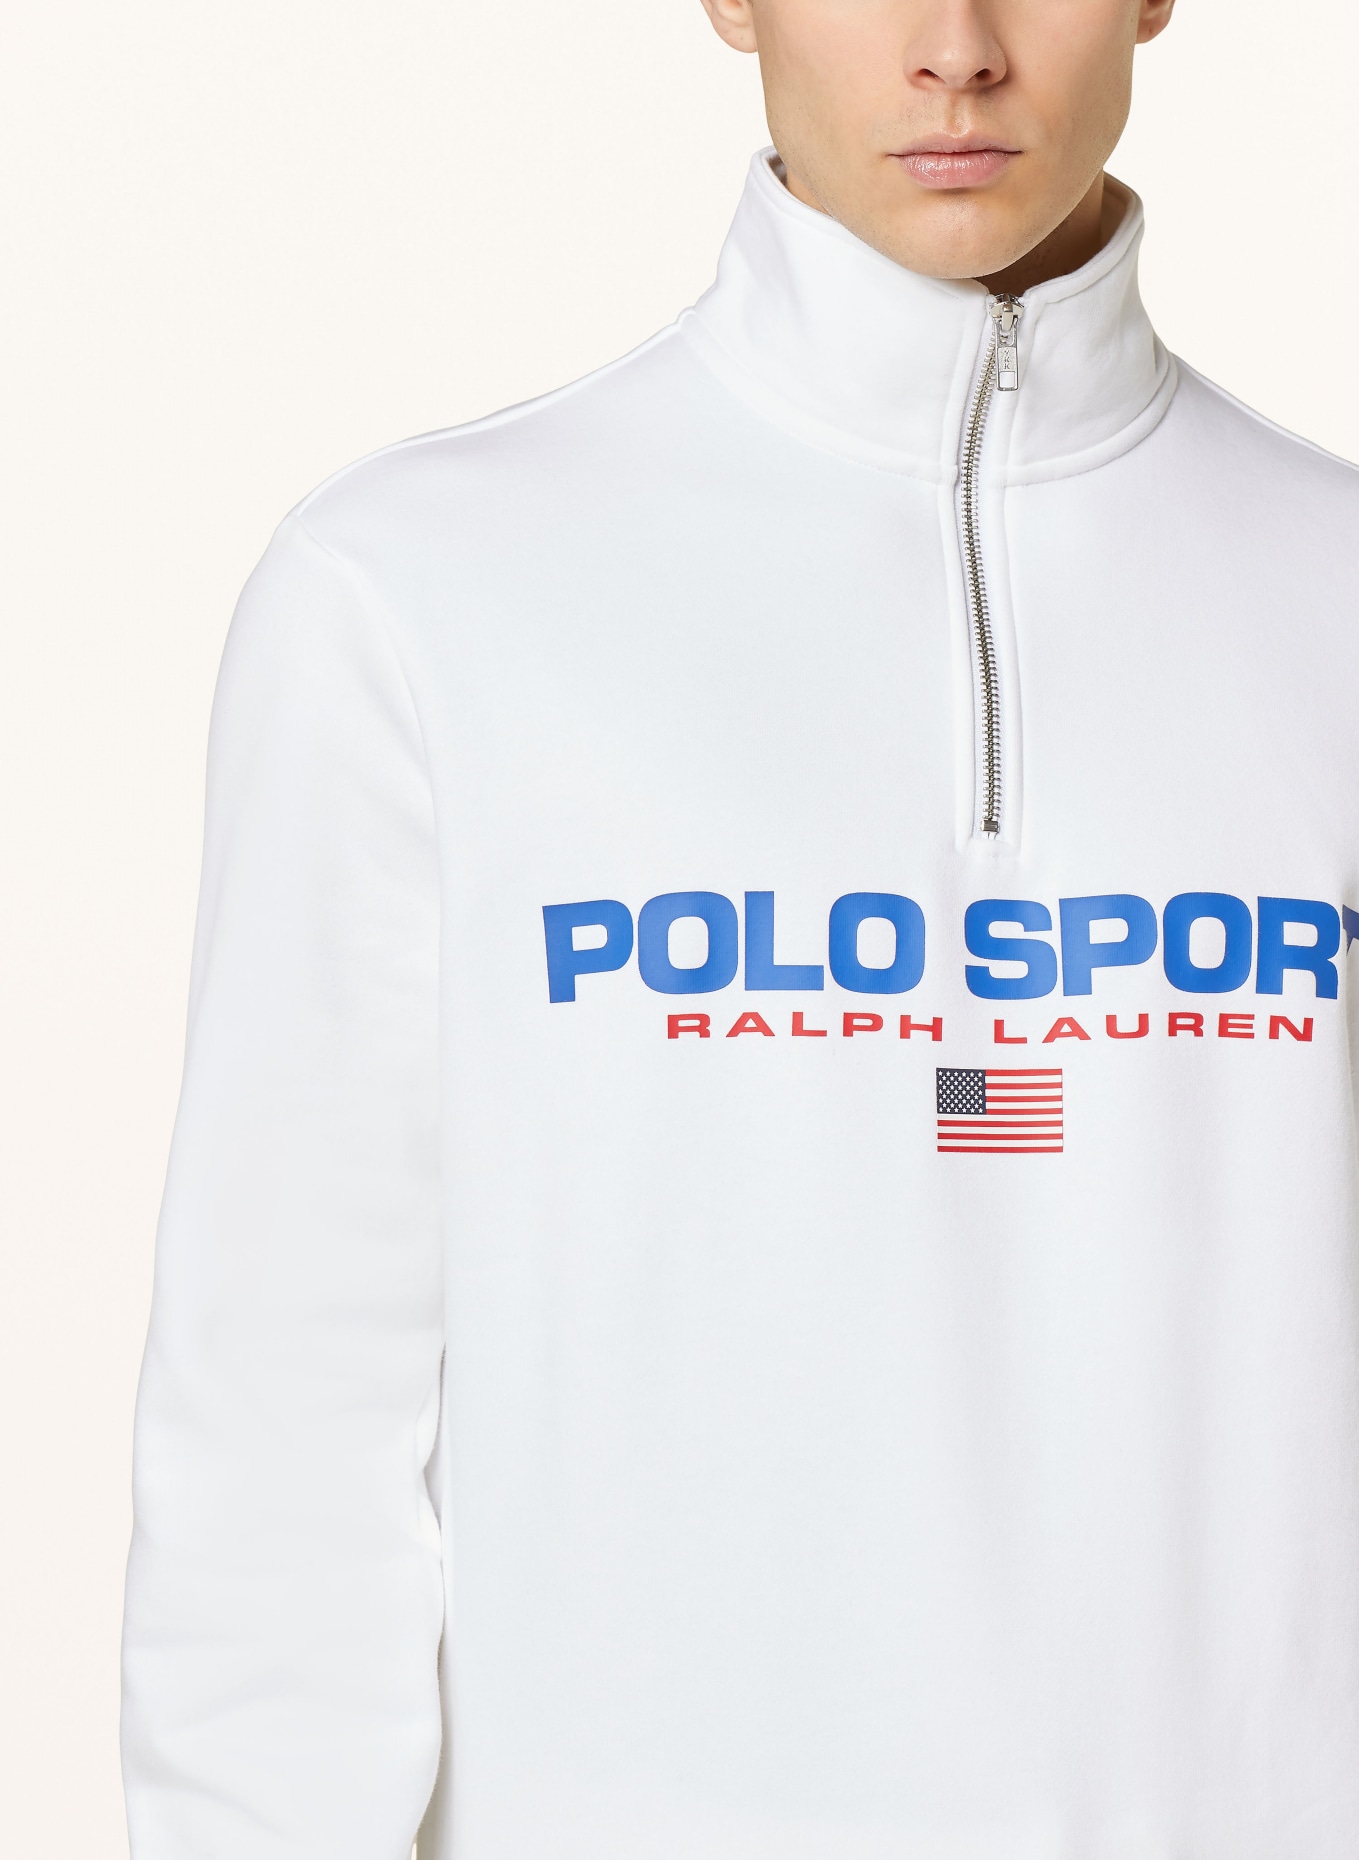 POLO SPORT Sweatshirt fabric half-zip sweater, Color: WHITE/ BLUE/ RED (Image 5)